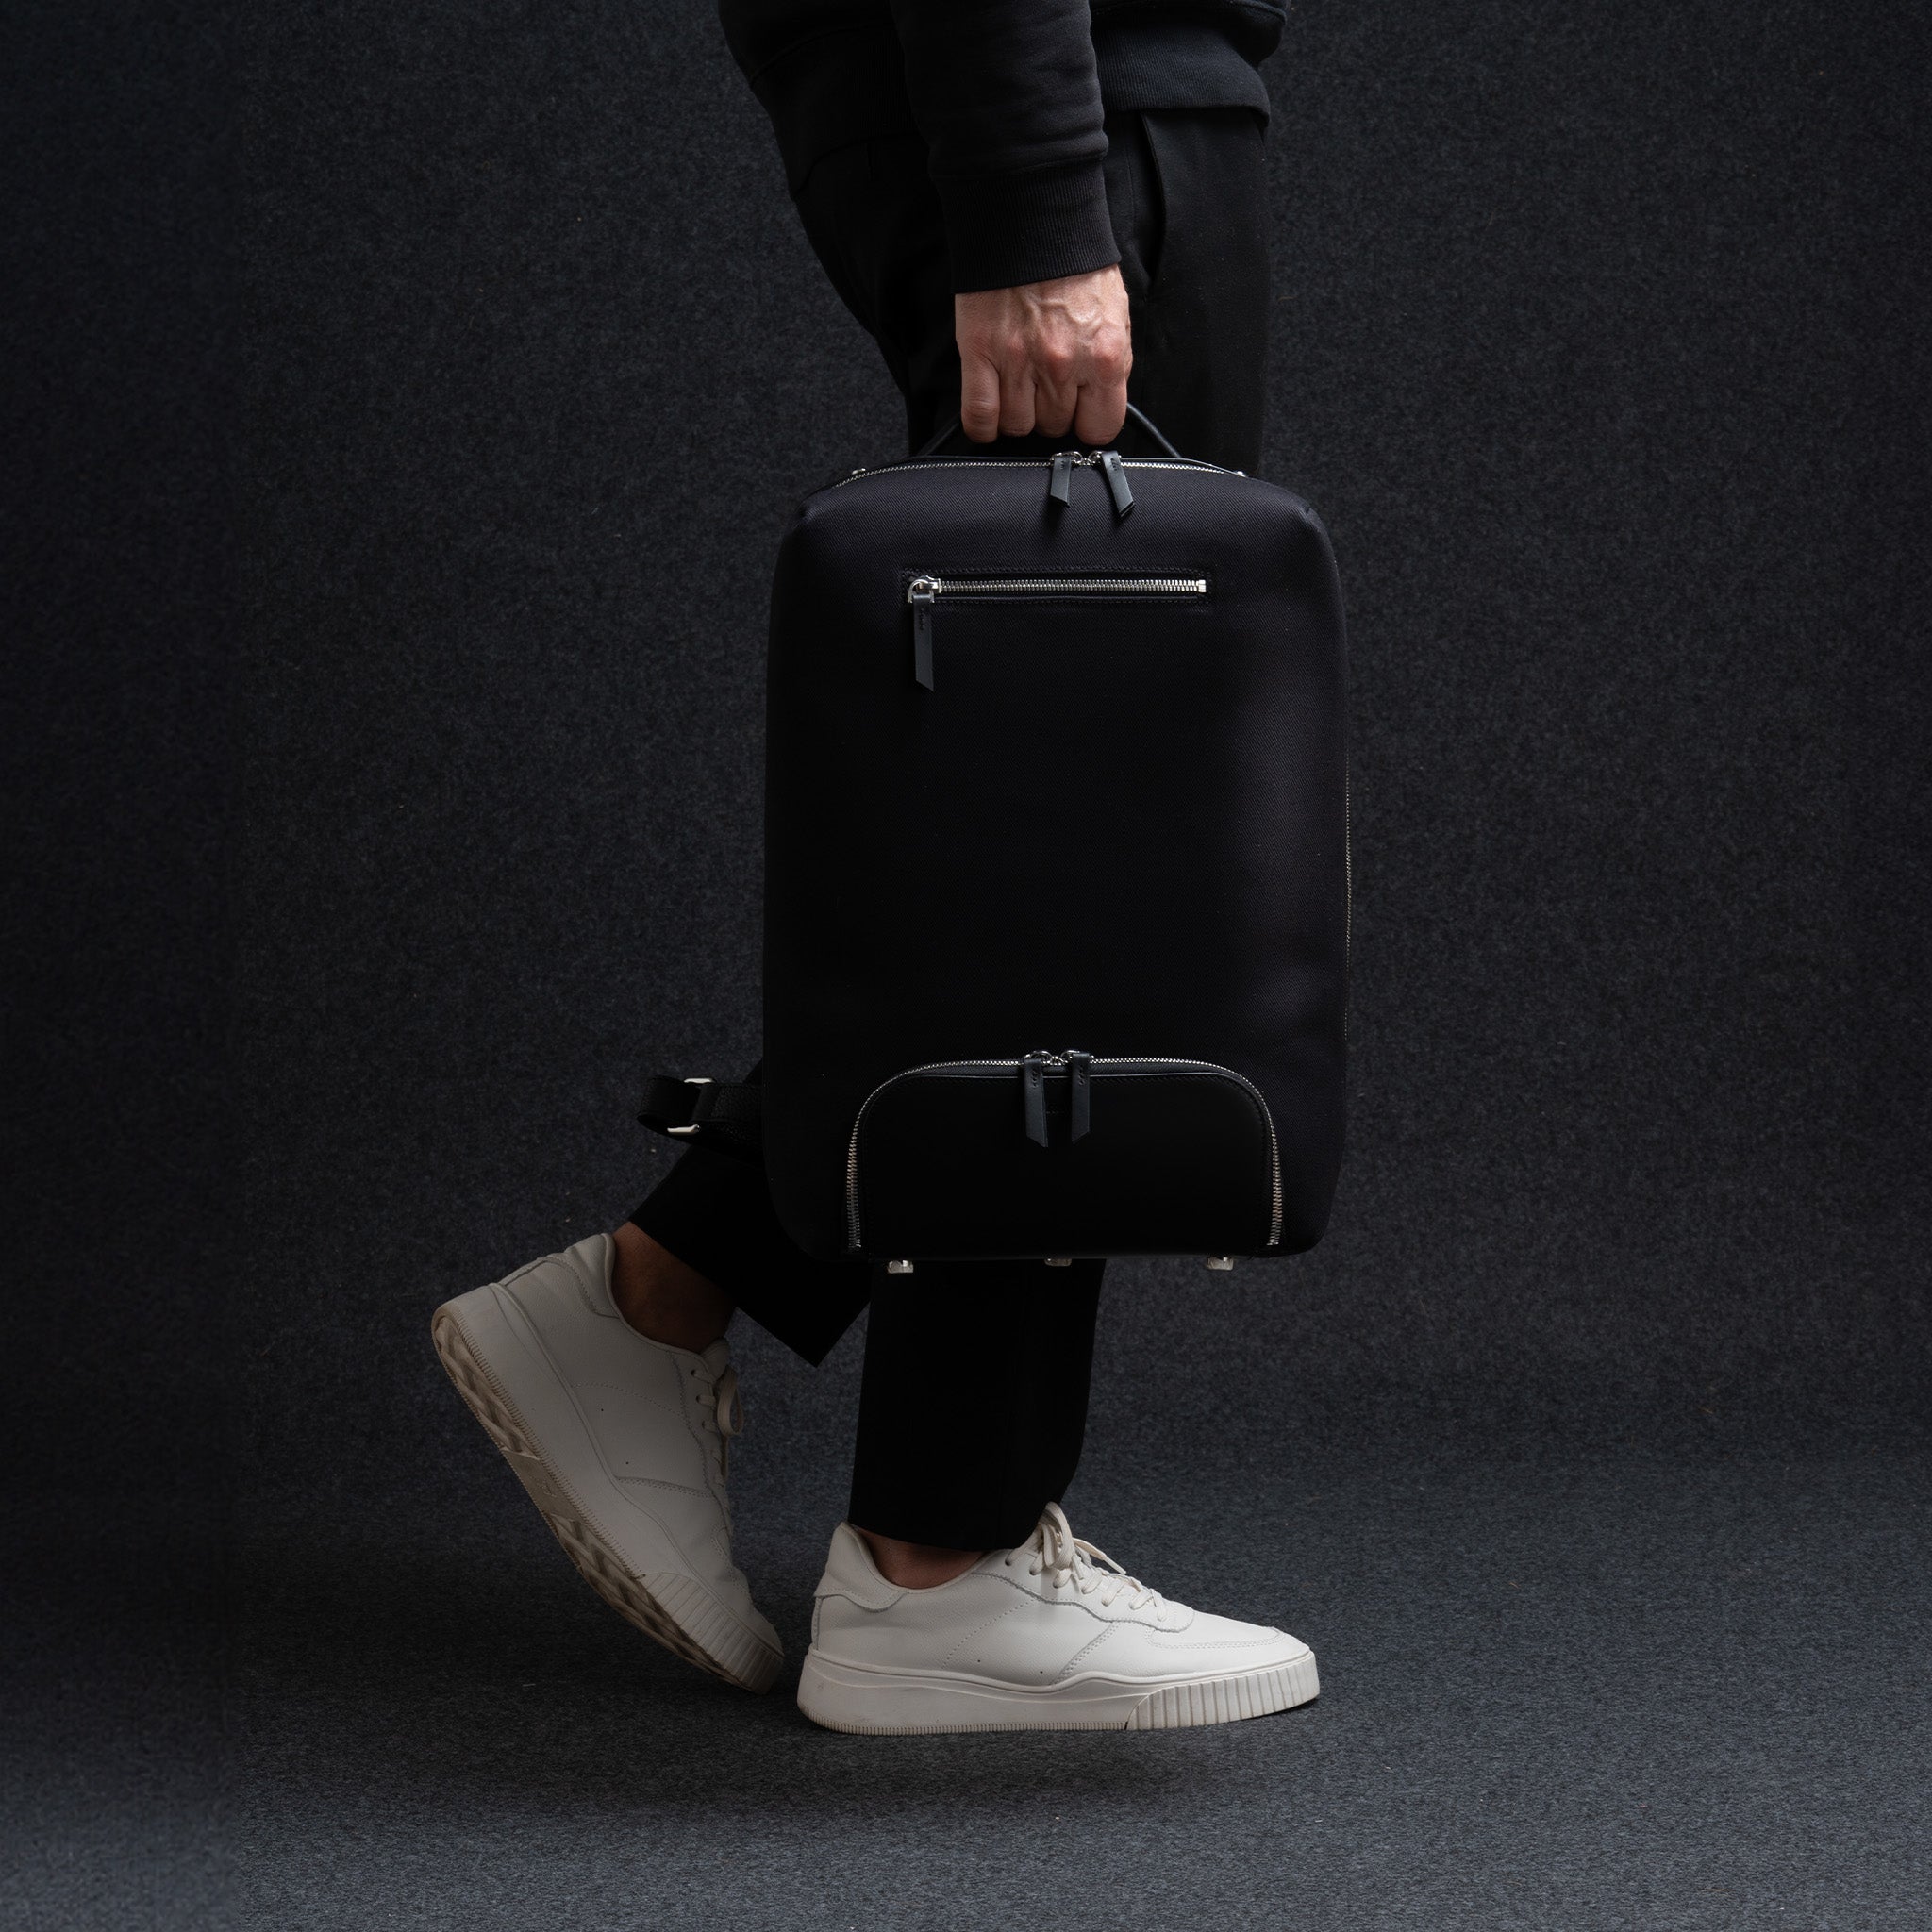 RUBENS, Black | lundi Cotton and Leather One Day Backpack